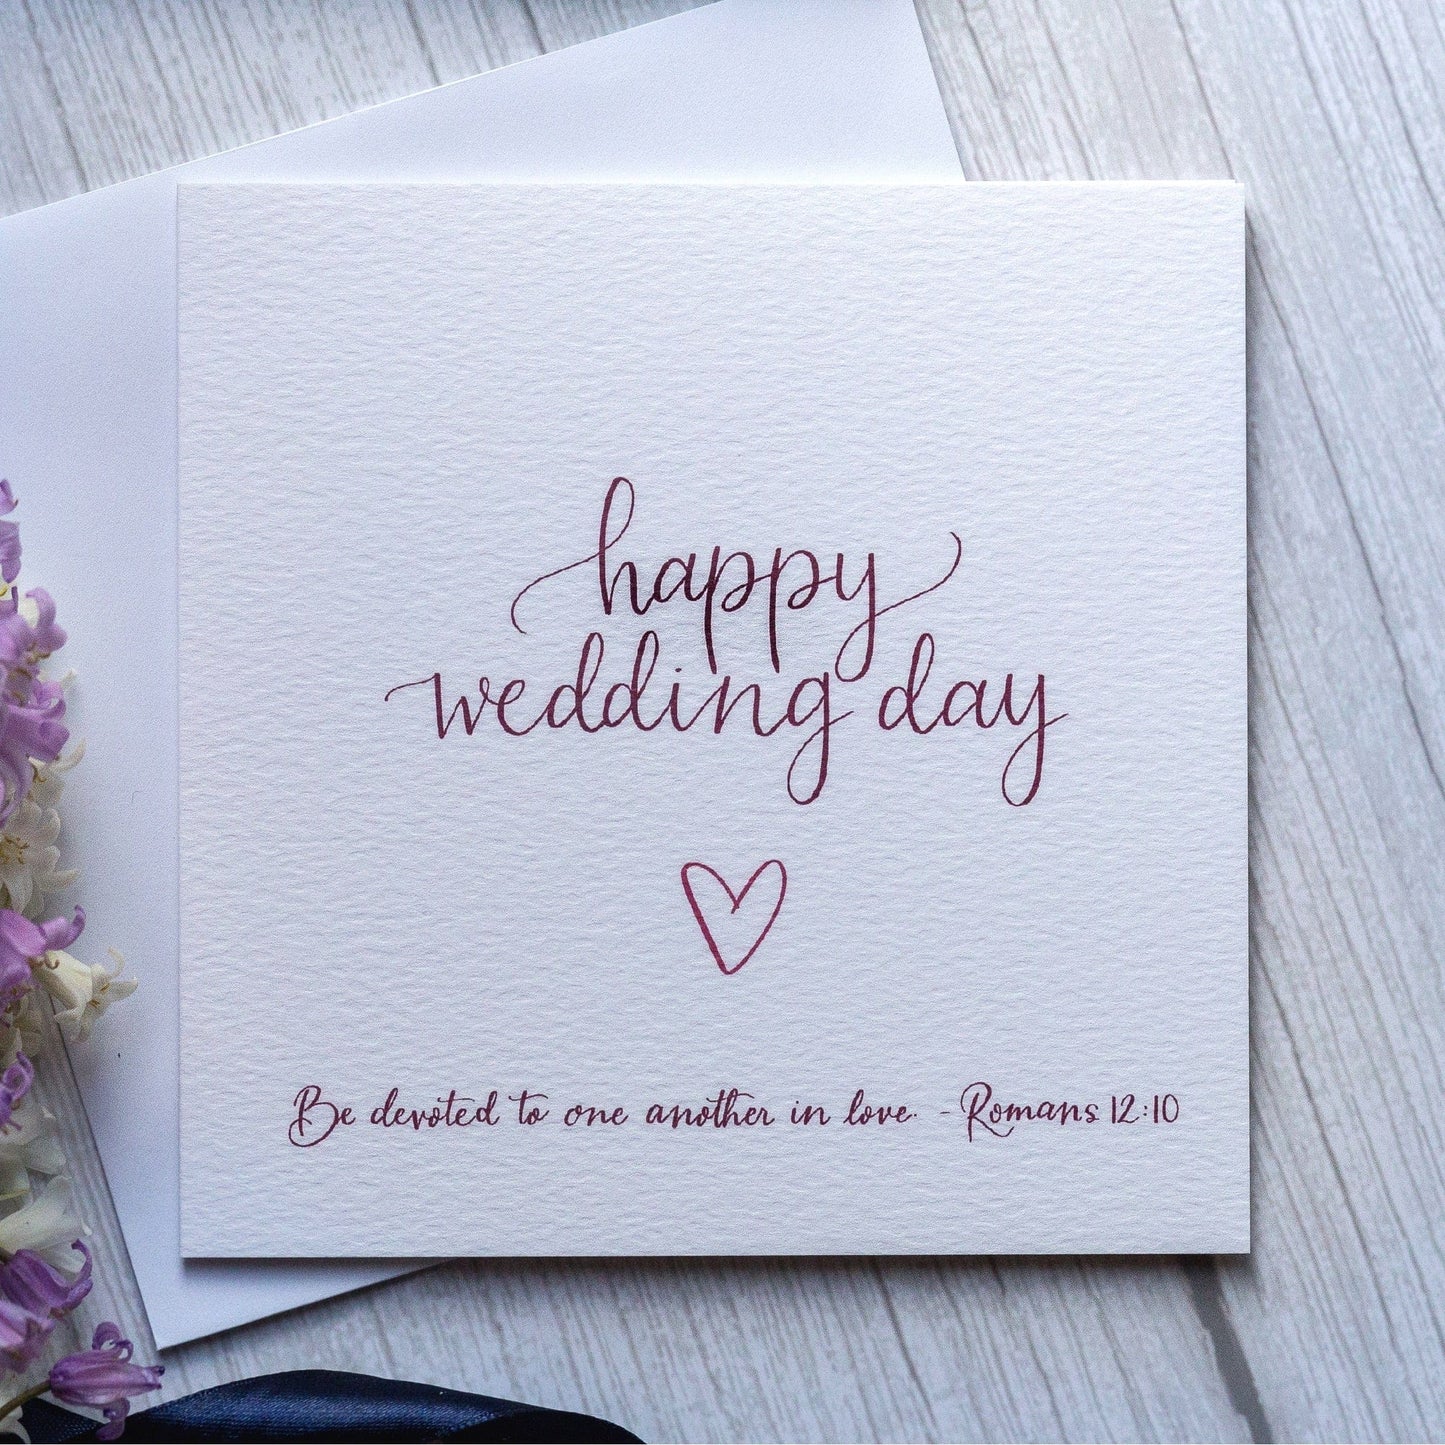 And Hope Designs Cards Christian happy wedding card, with Romans 12:10